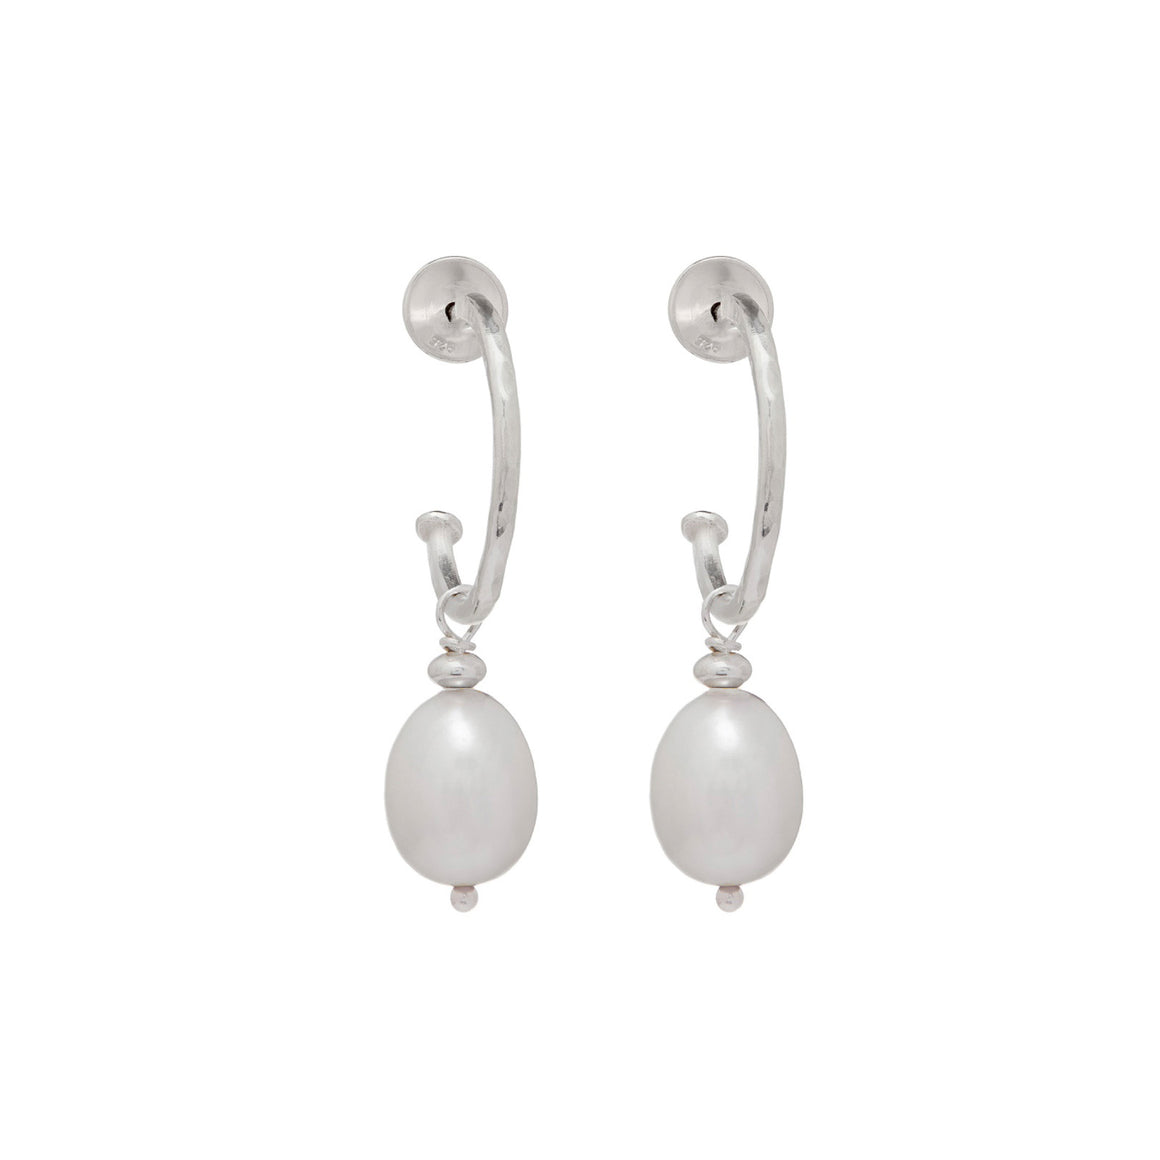 Silver Hoop Earring With White Freshwater Pearls